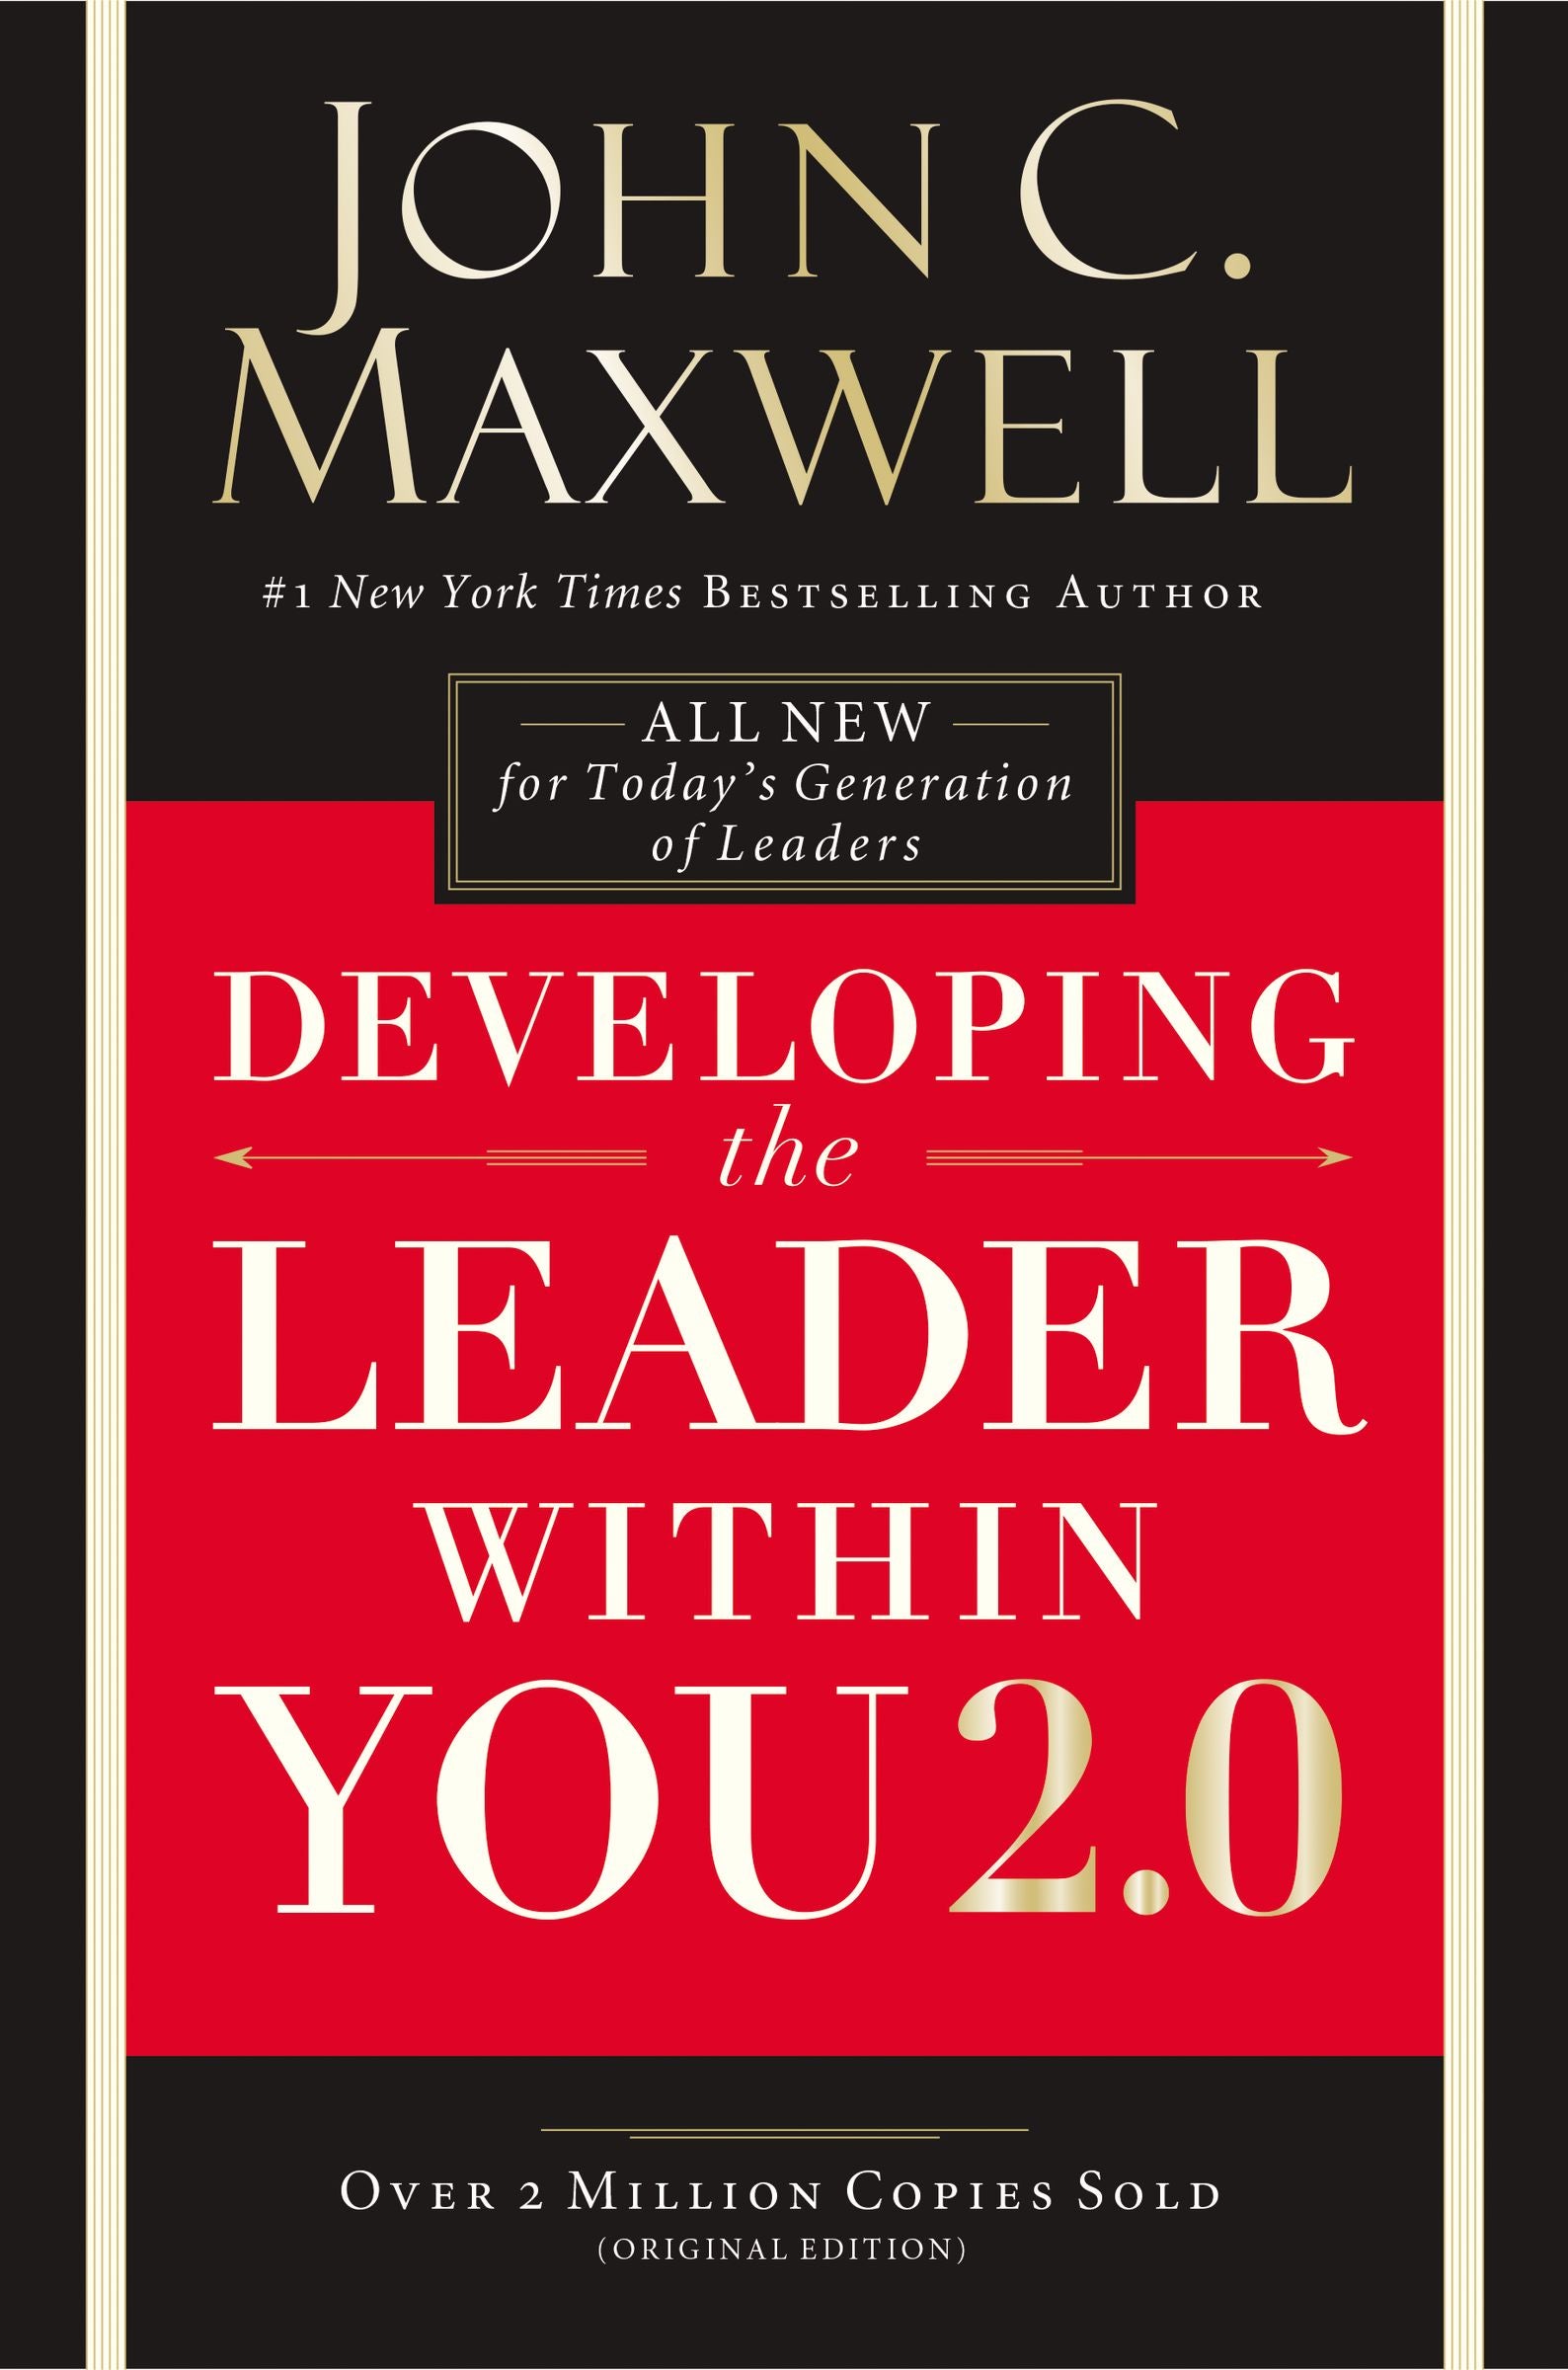 Image of Developing the Leader Within You 2.0 other